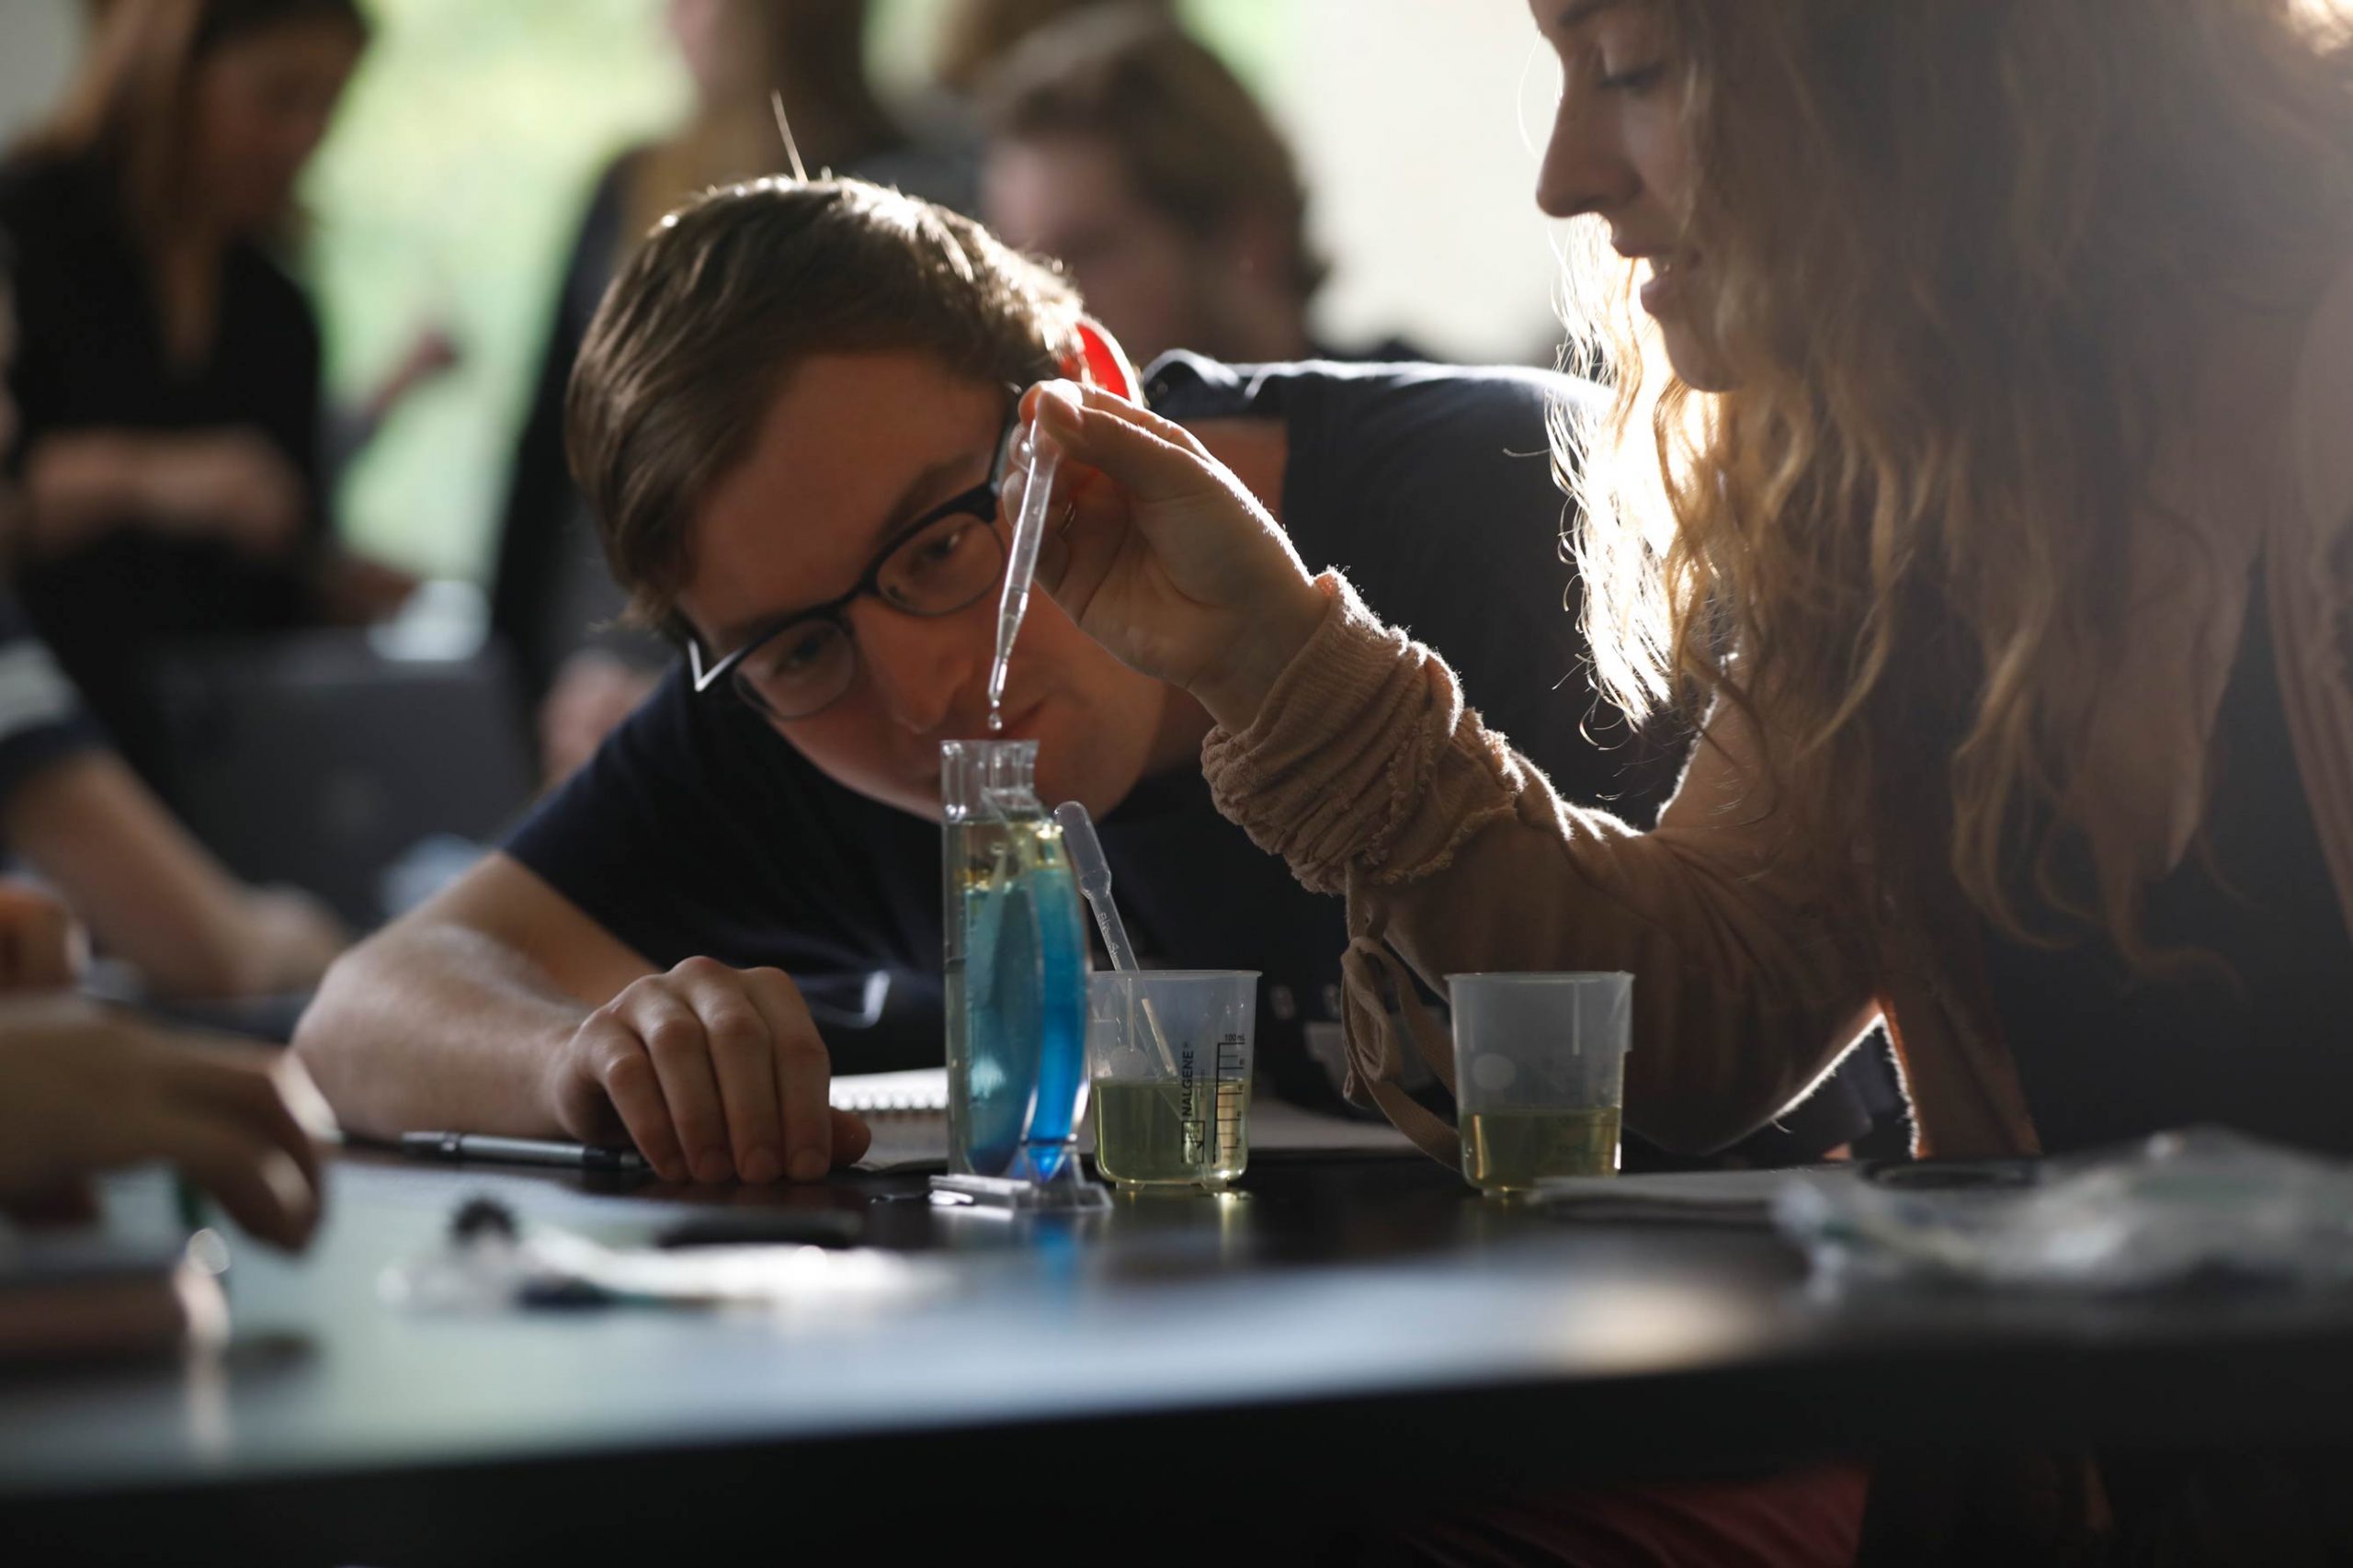 Two students work with beakers in a lab environment